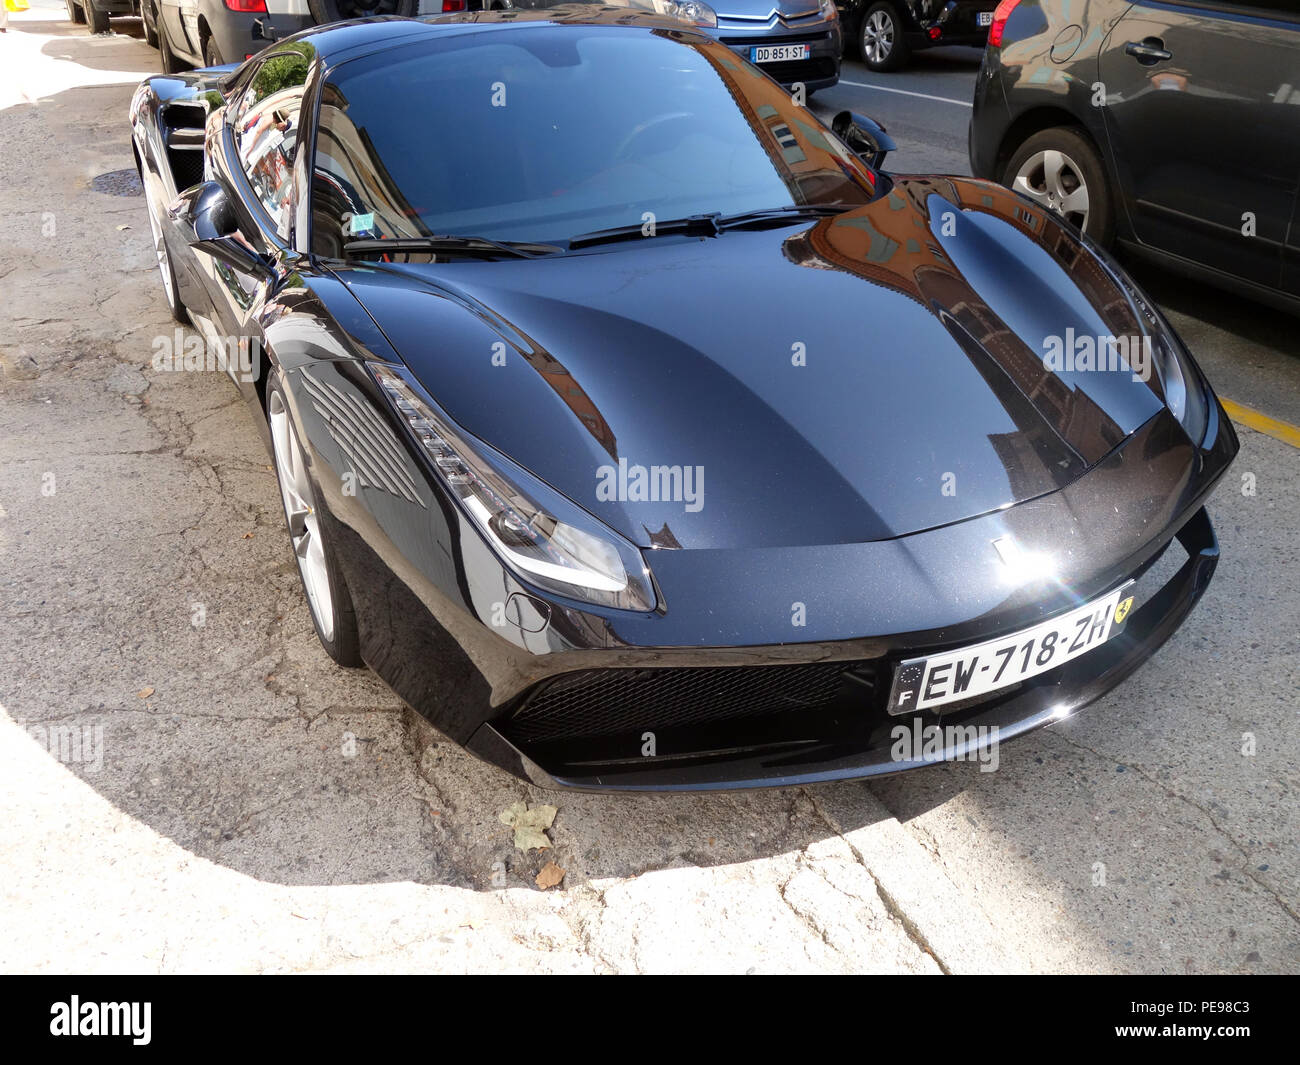 A Black Ferrari 488 Spider Parked On A Street In France